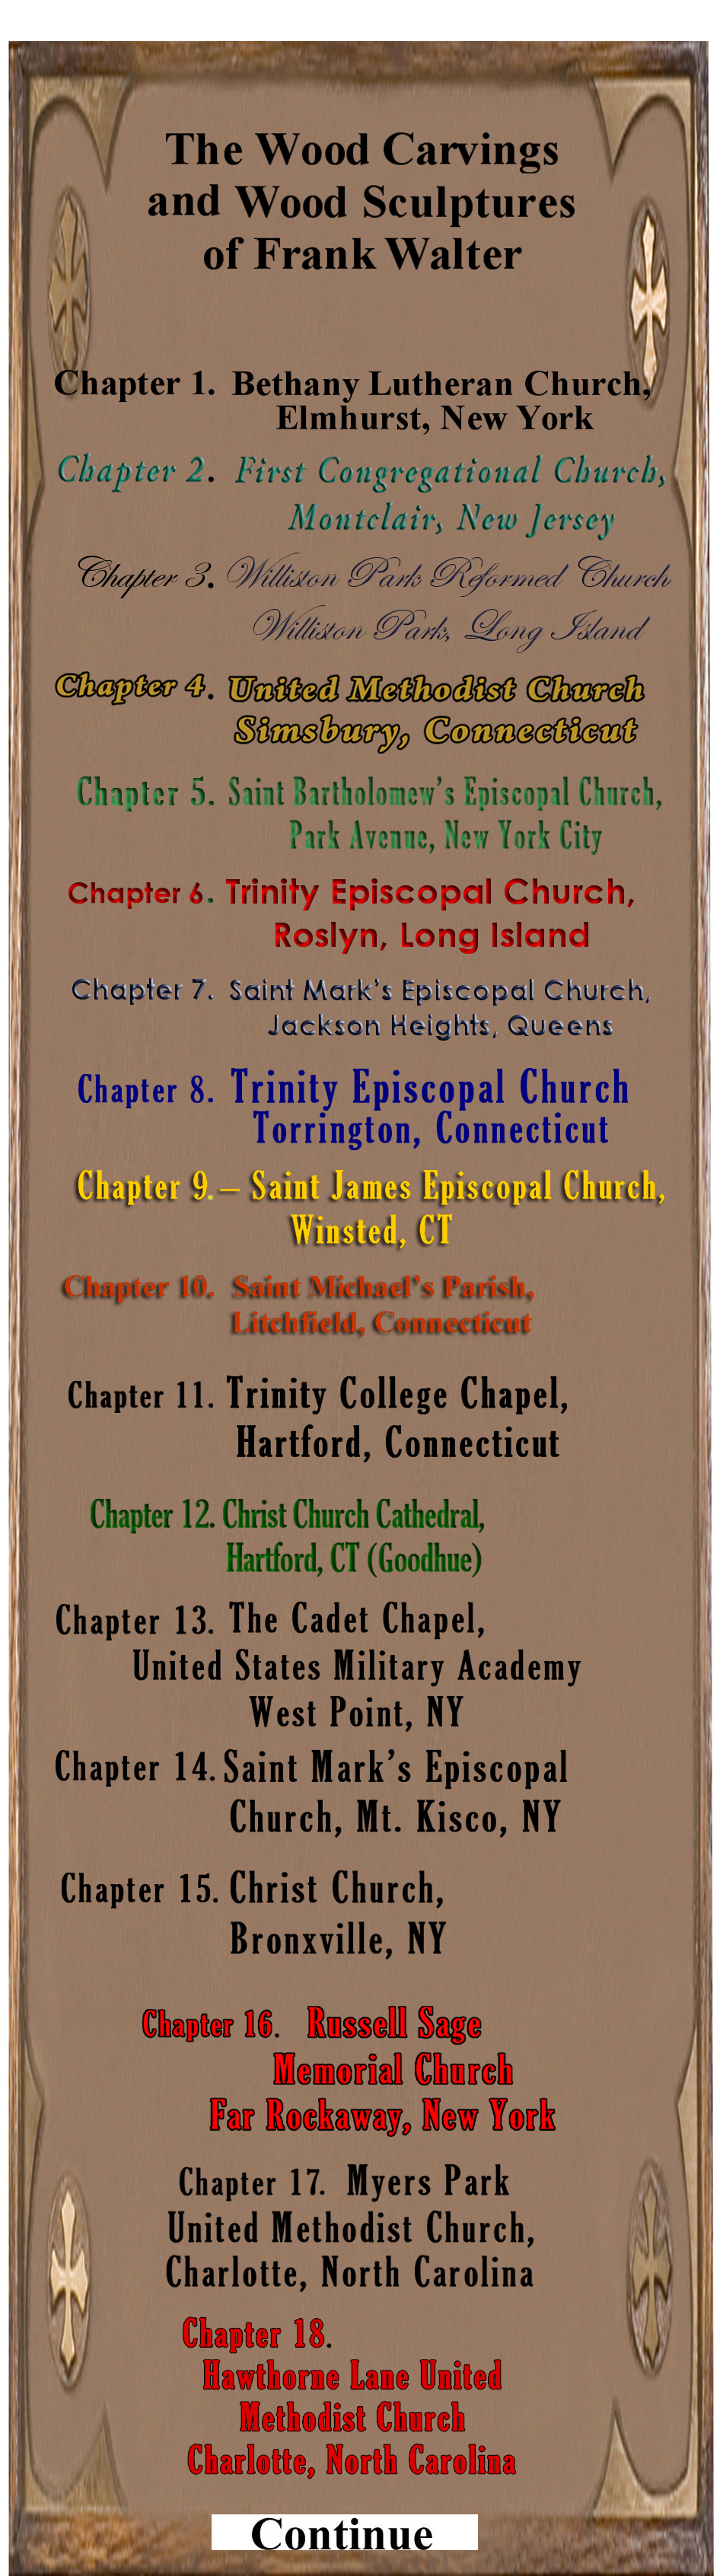 More Chapters